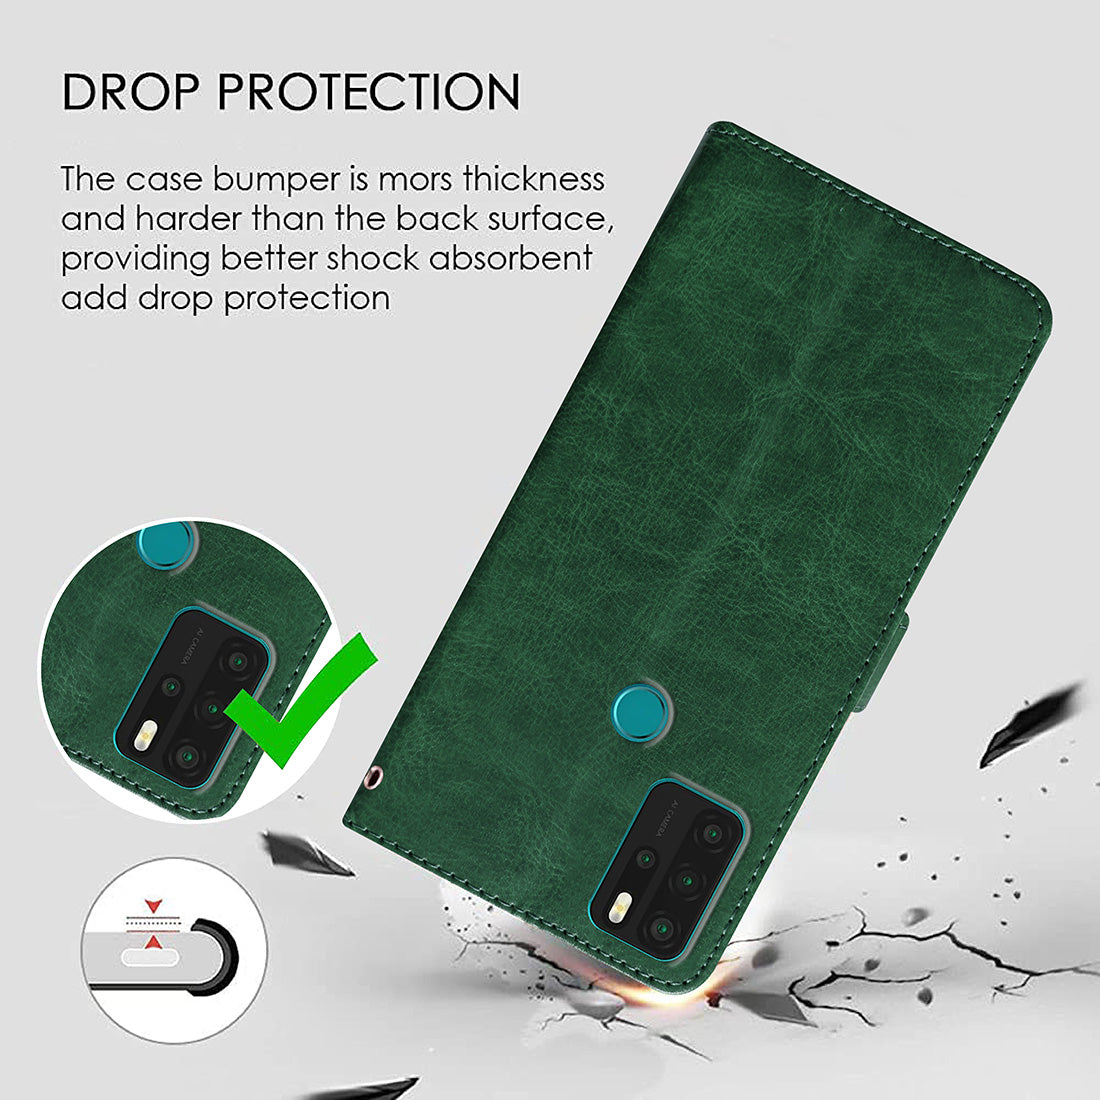 Premium Wallet Flip Cover for Micromax IN Note 1